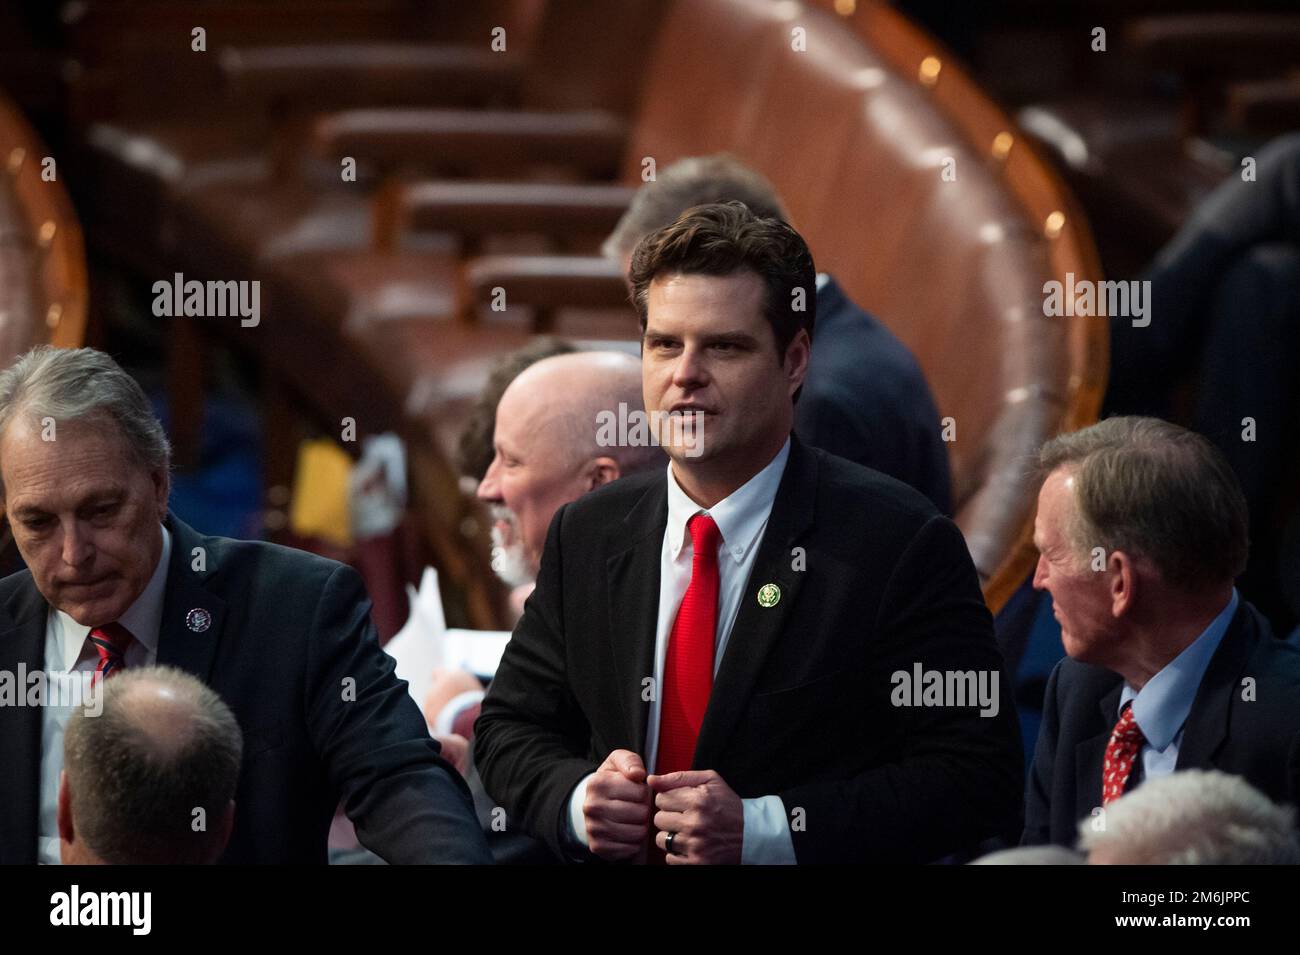 Washington, United States Of America. 03rd Jan, 2023. United States Representative Matt Gaetz (Republican of Florida) chats with others as the 118th Congress votes for Speaker of the House, in the House chamber at the US Capitol in Washington, DC, Tuesday, January 3, 2023.cCredit: Rod Lamkey/CNP/Sipa USA(RESTRICTION: NO New York or New Jersey Newspapers or newspapers within a 75 mile radius of New York City) Credit: Sipa USA/Alamy Live News Stock Photo